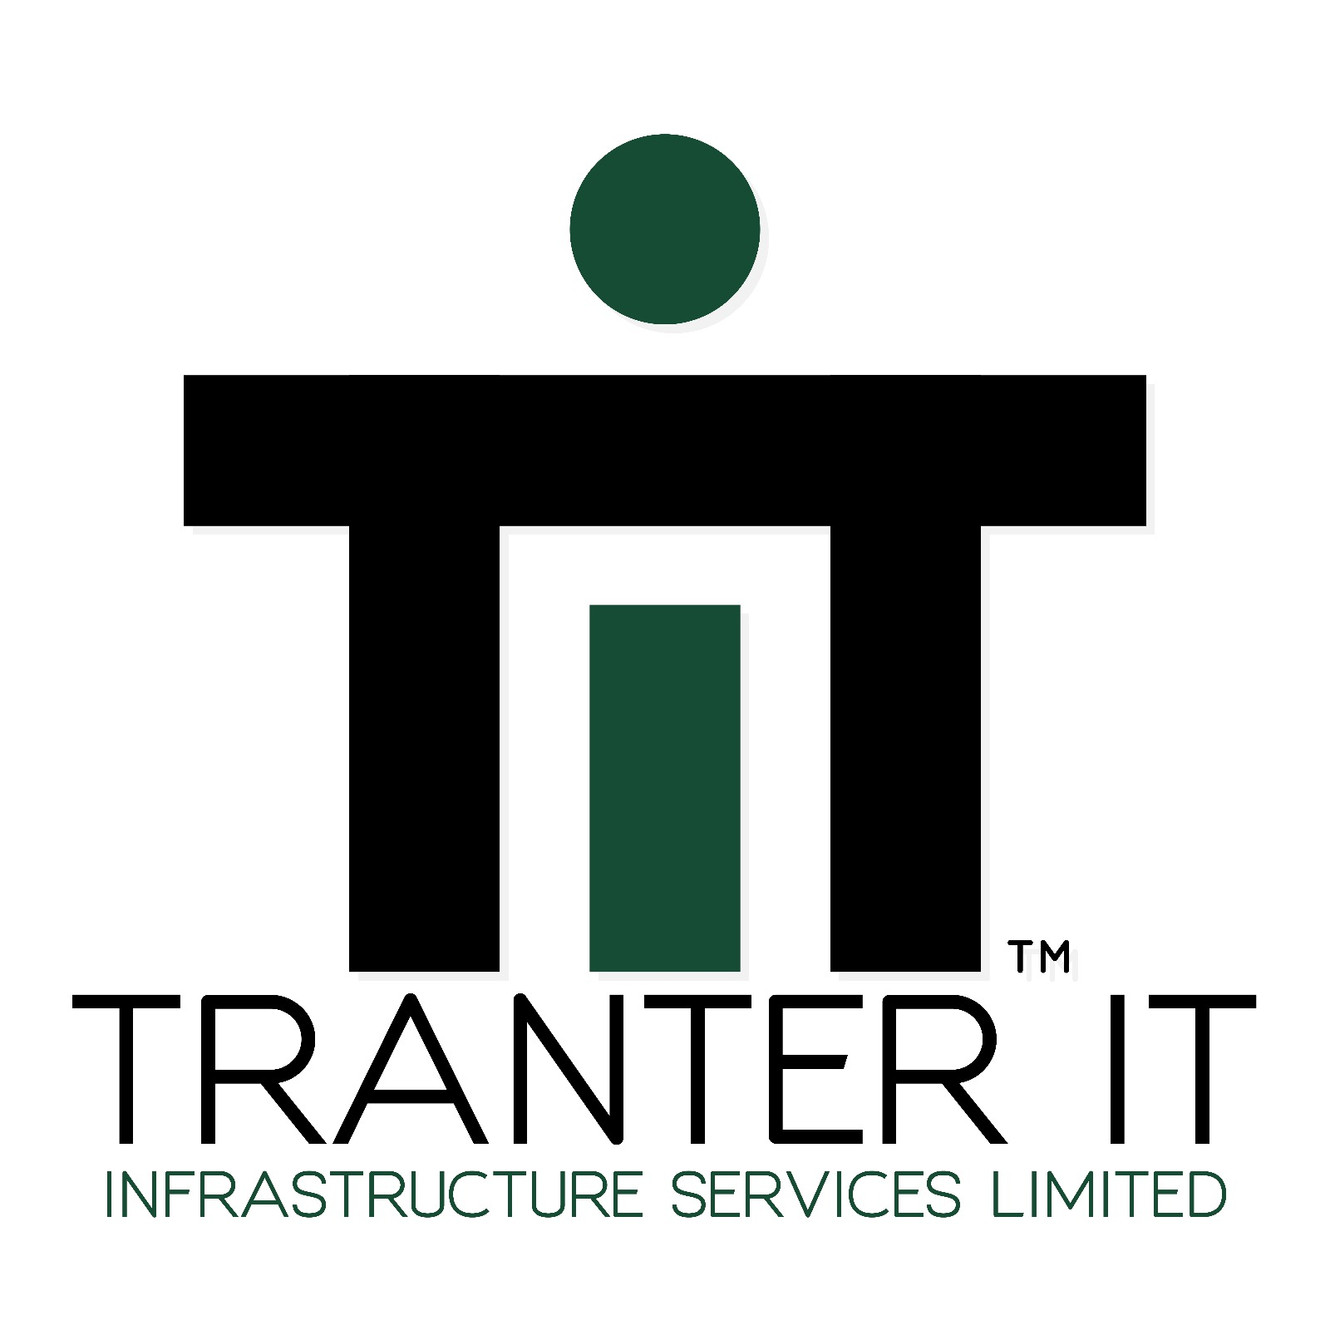 Tranter-IT Infrastructure Services Limited